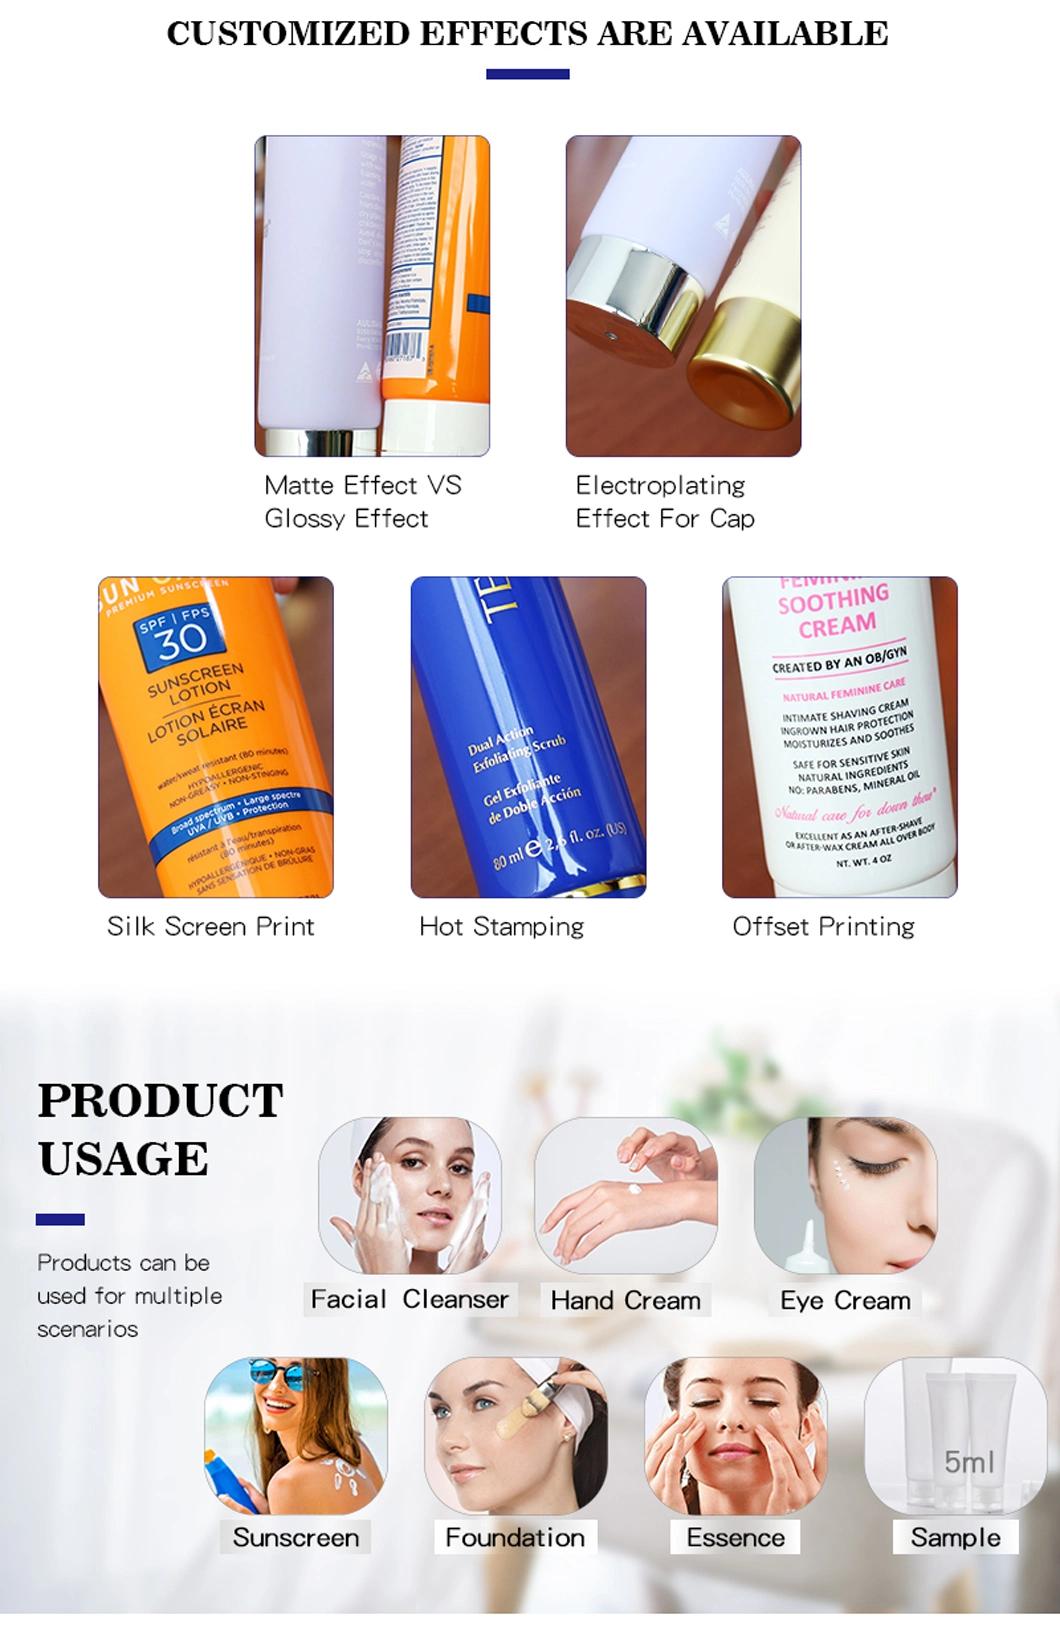 Customize Eye Cream Bb Foundation Facial Cleanser Tube with Good Production Line